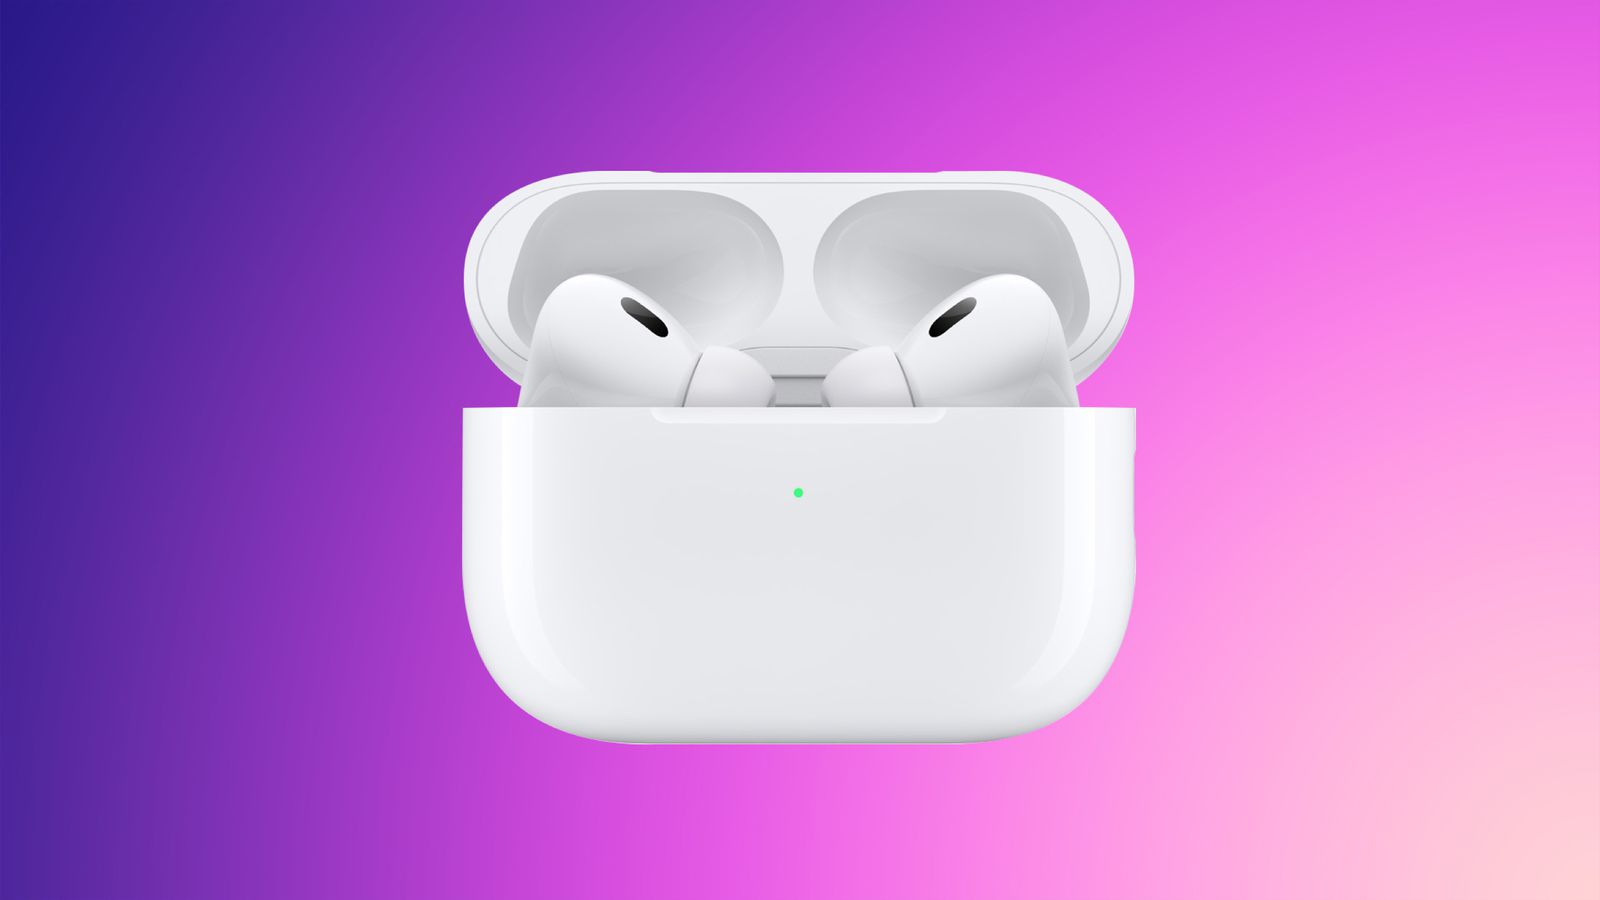 Over 1,000 Fake AirPods Pro Seized at Dulles International Airport